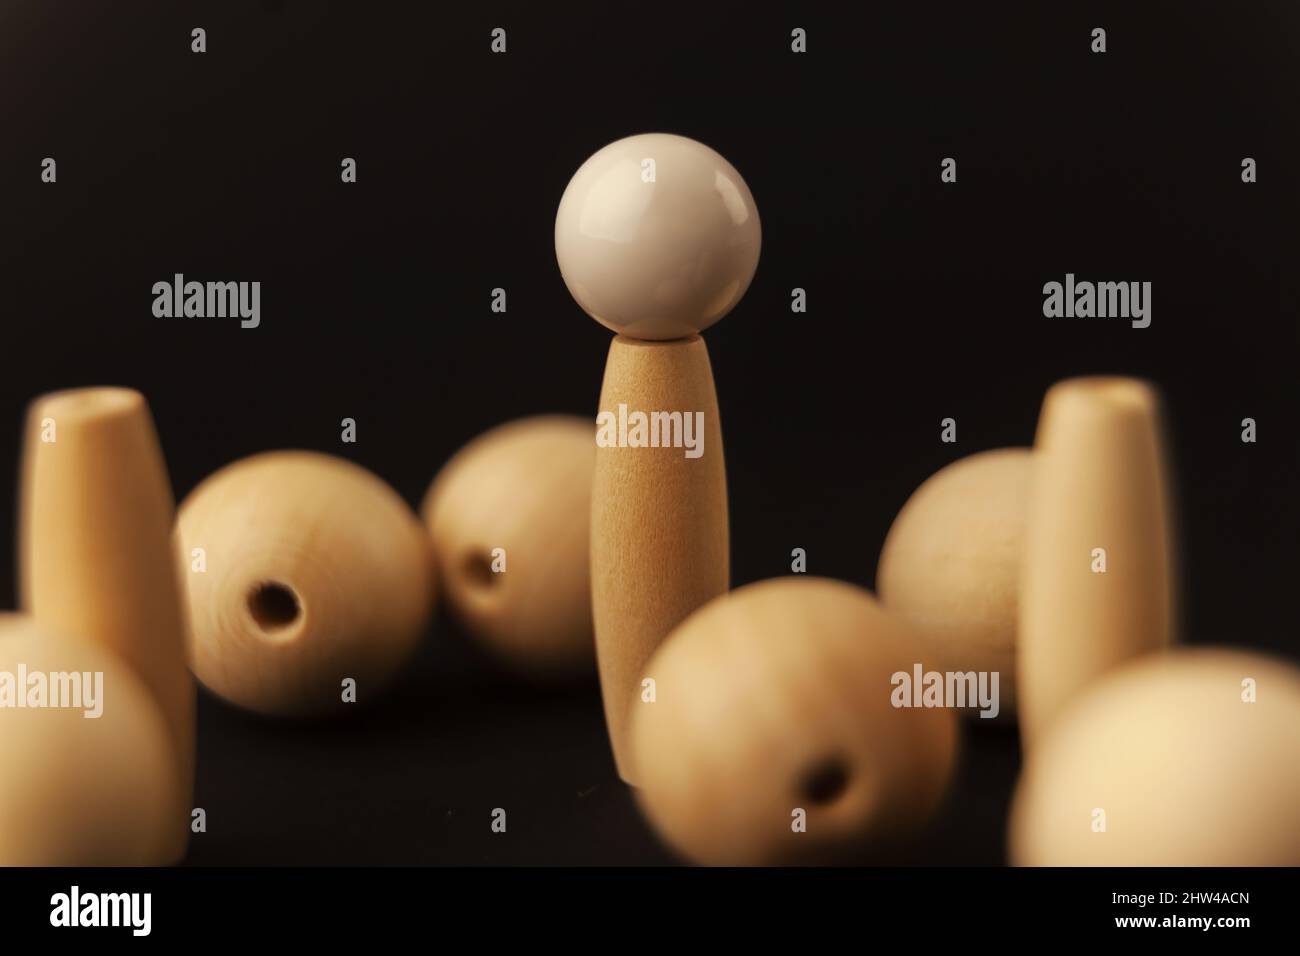 wooden balls and white ball on cylinder on black background, alone against all, close up Stock Photo